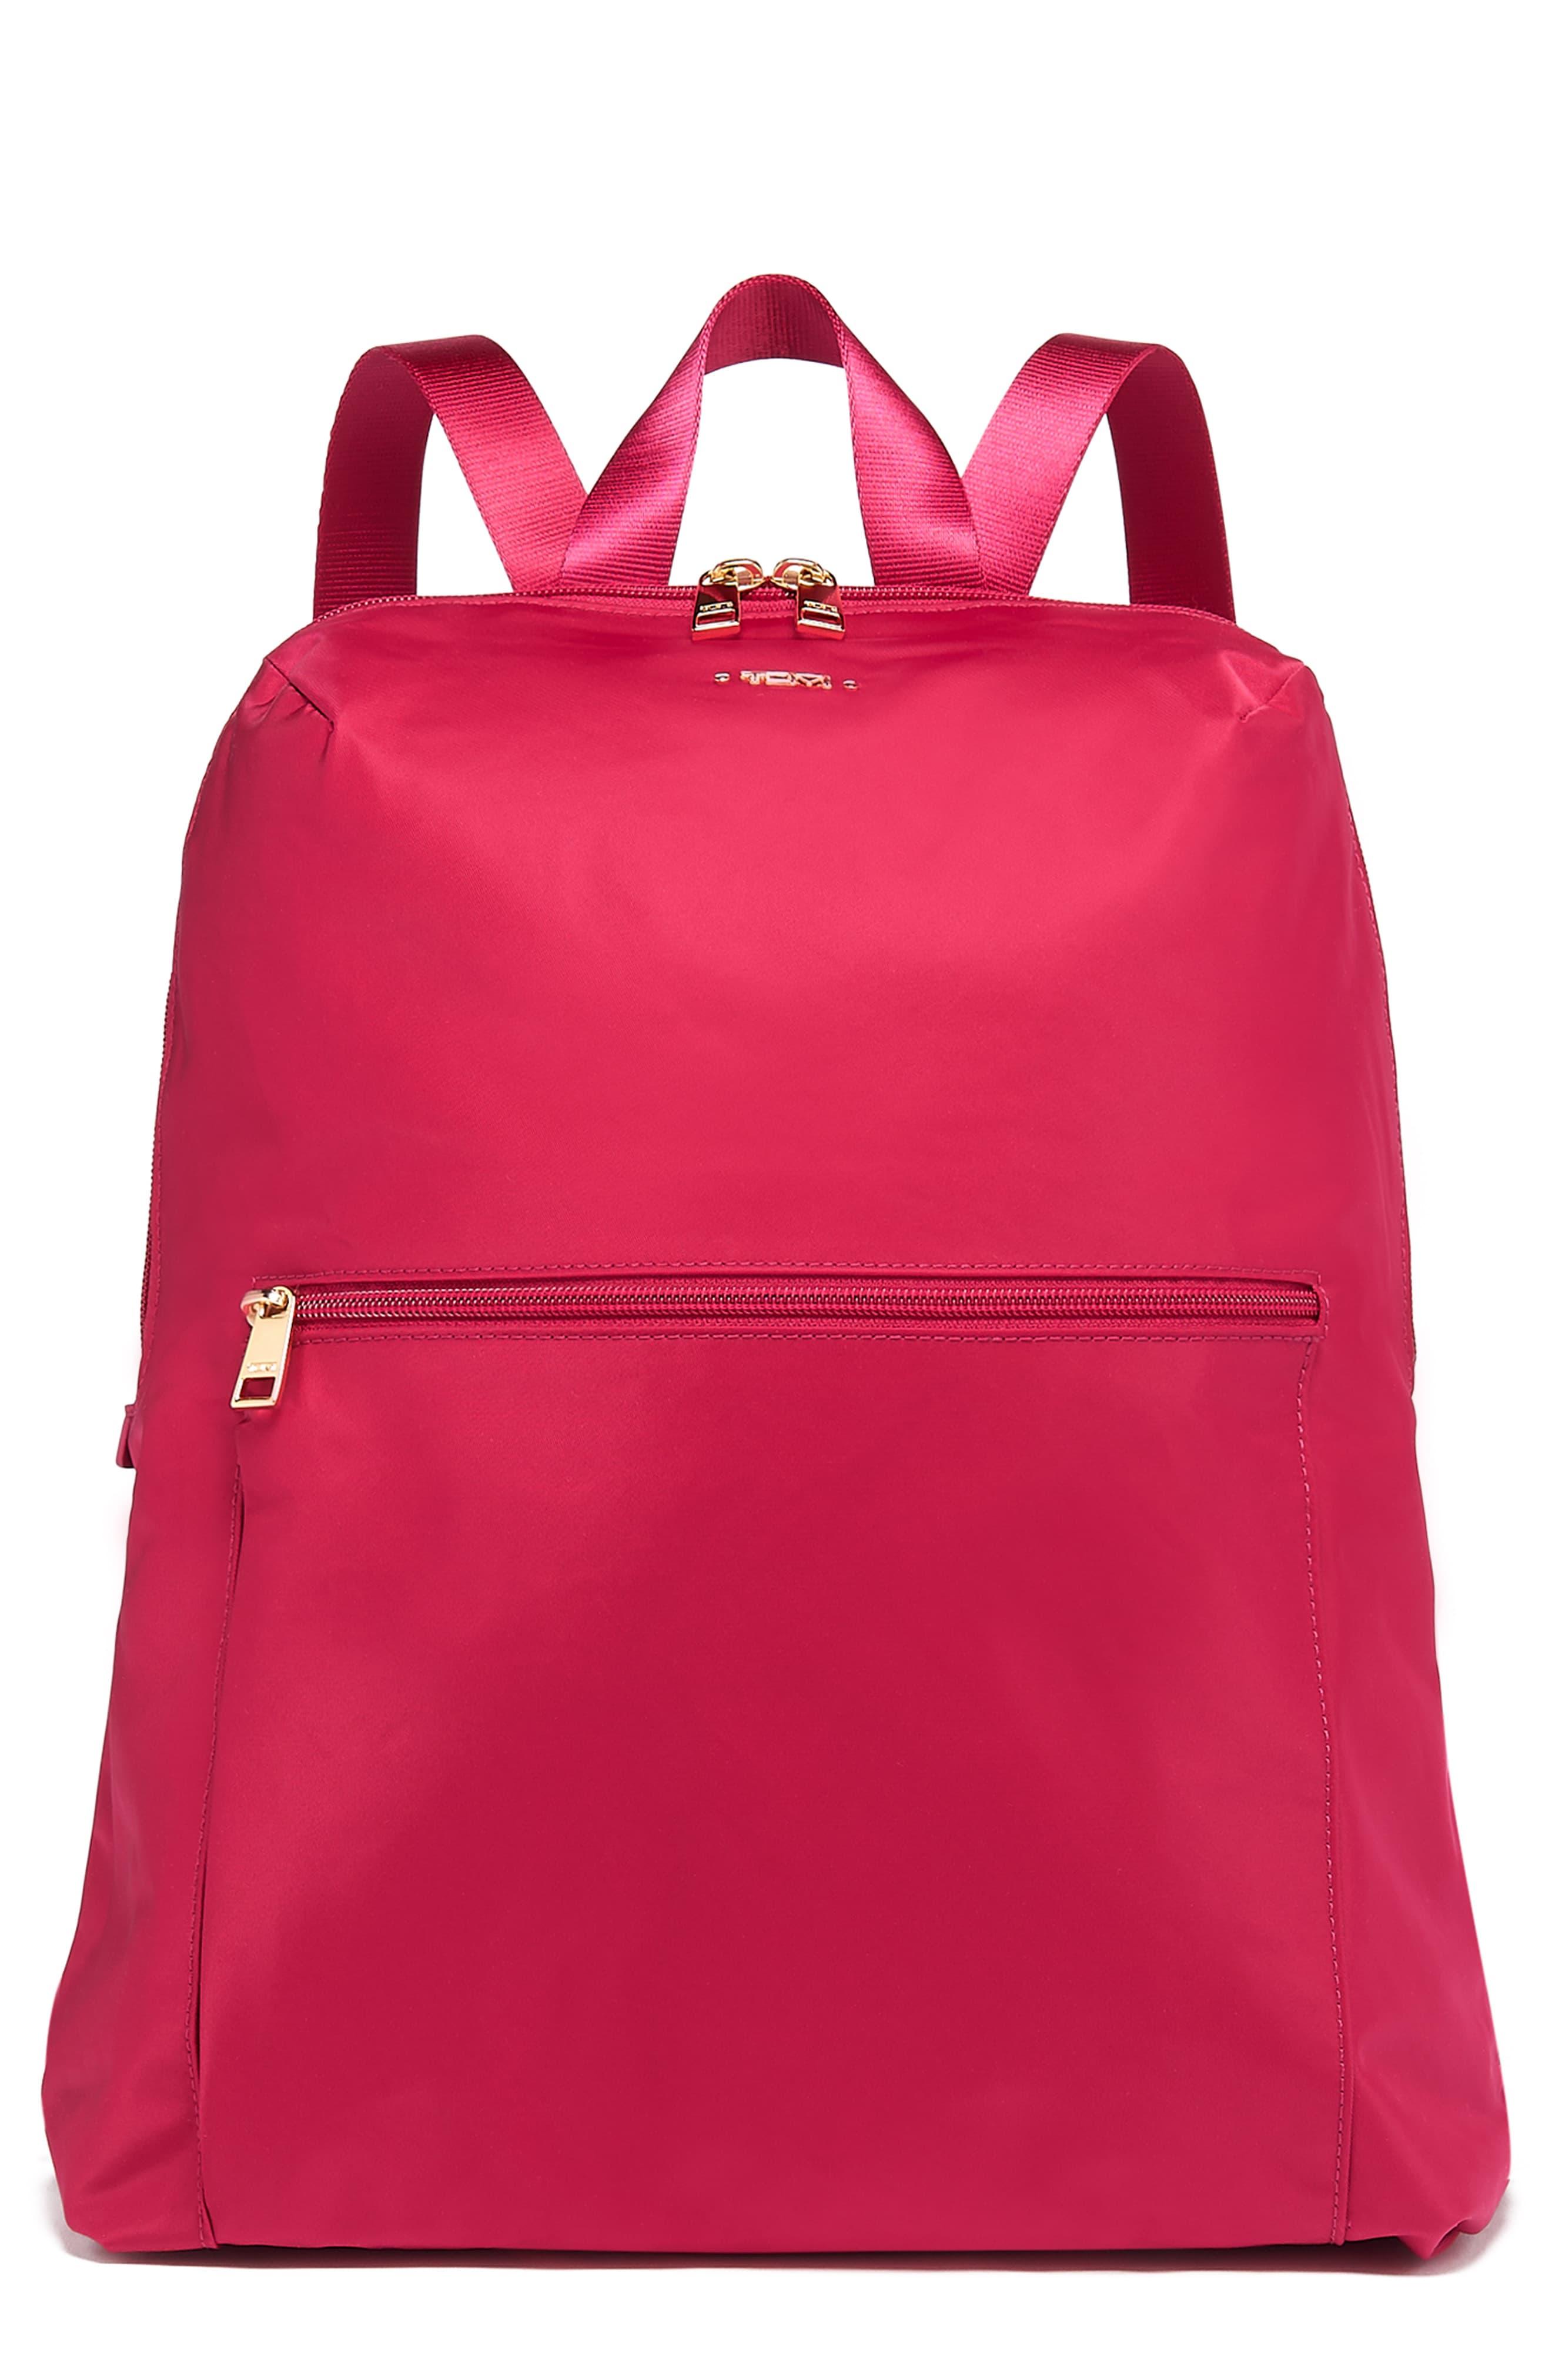 just in case nylon travel backpack